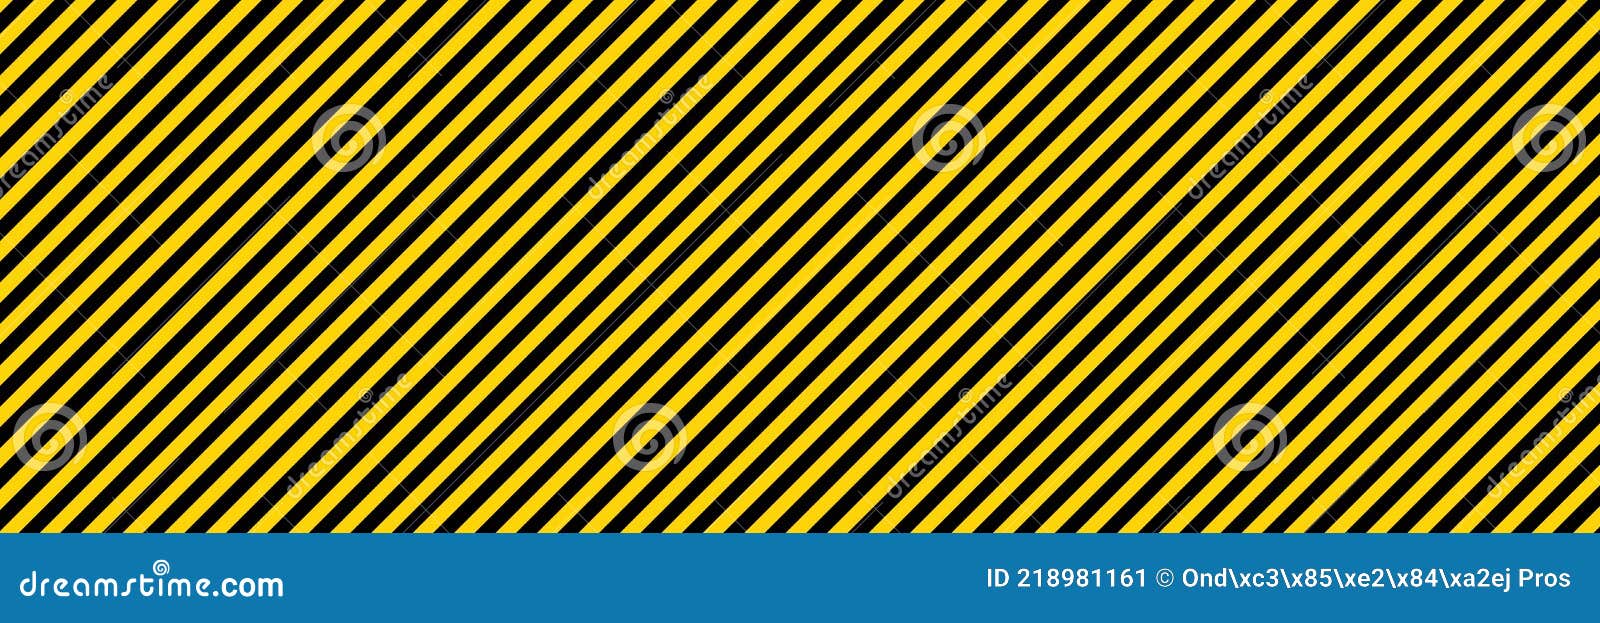 black and yellow diagonal line striped. blank   warning background. hazard caution sign tape. space for text